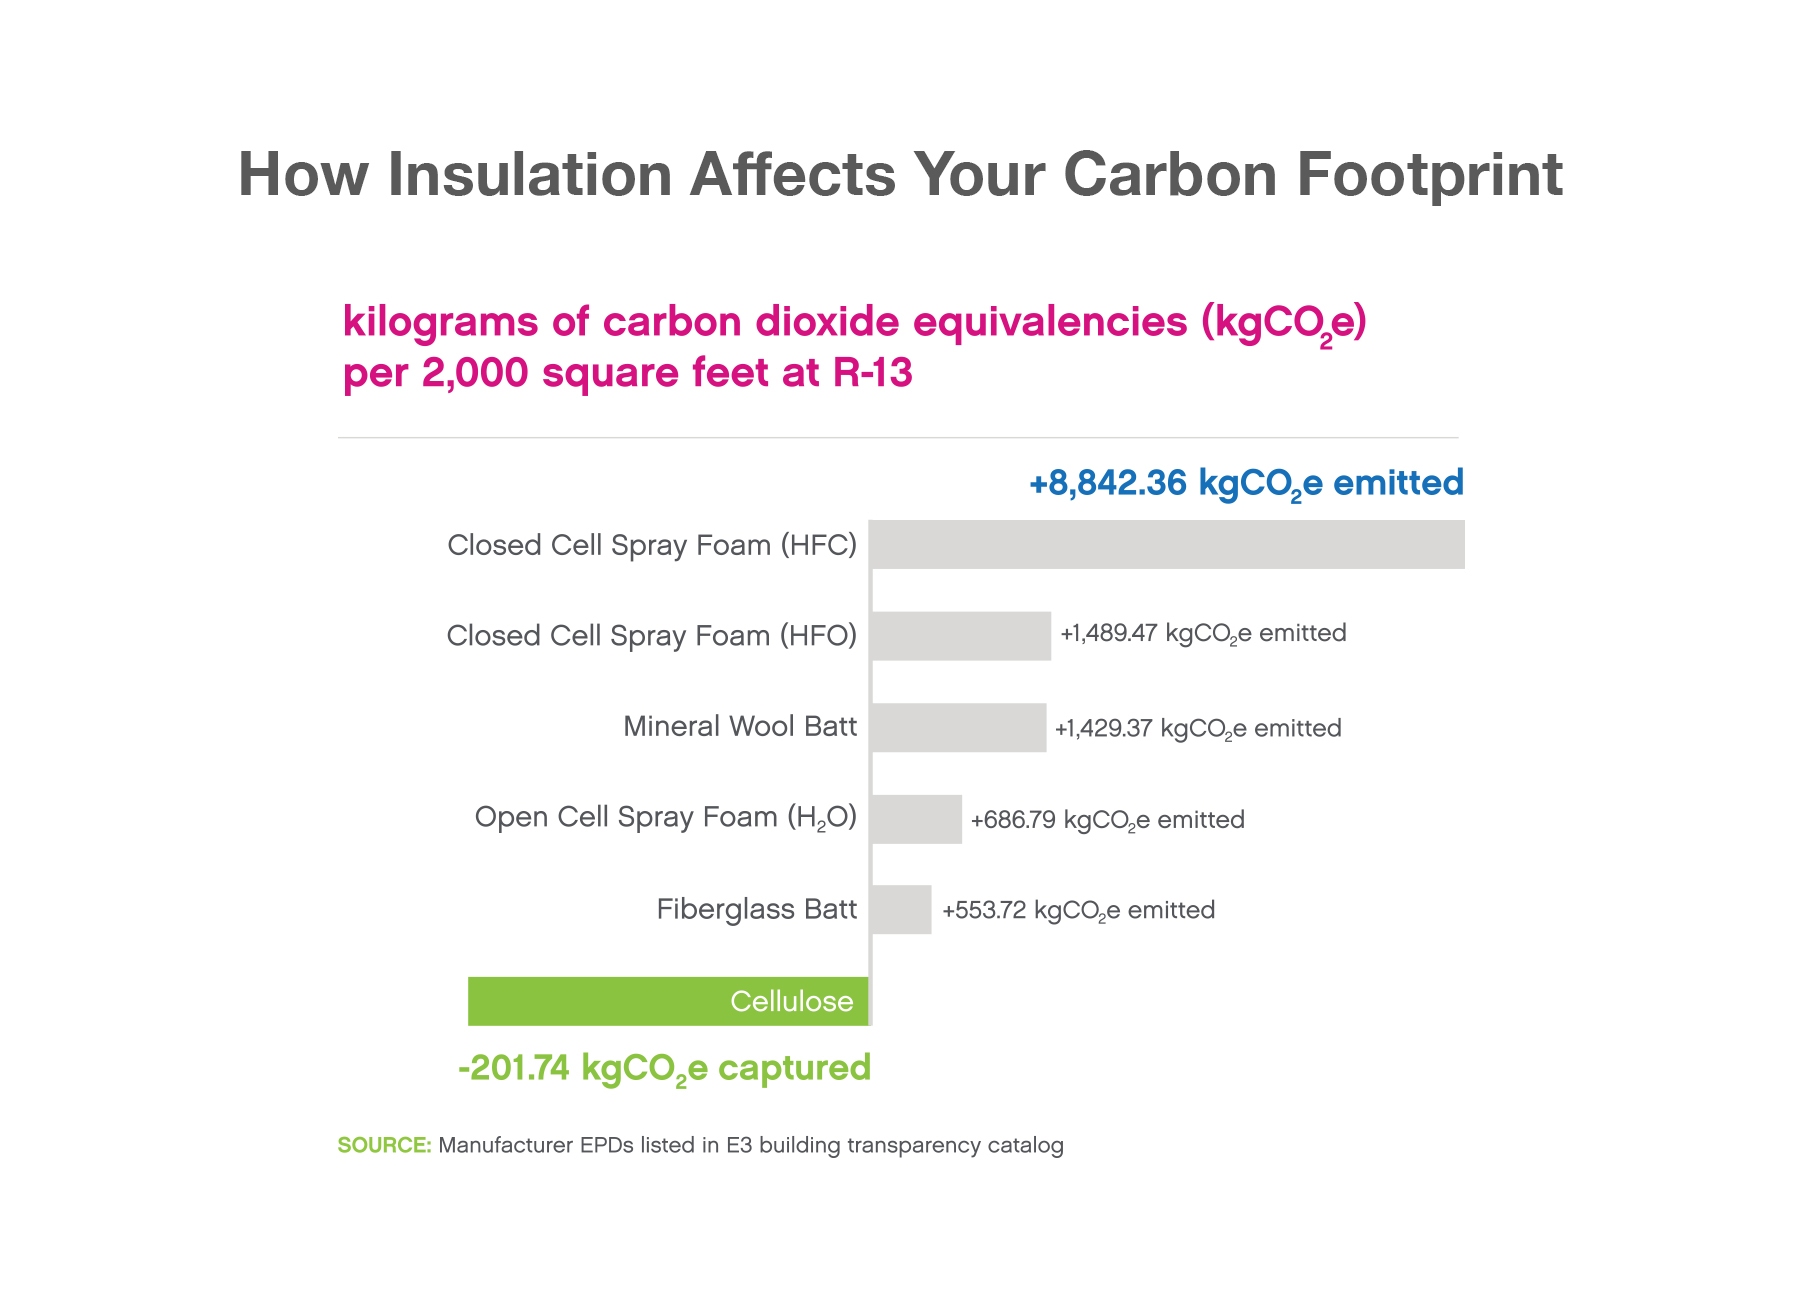 Bar chart showing carbon impacts of insulation types alongside Sanctuary by Greenfiber, which is the only type that reduces global warming potential